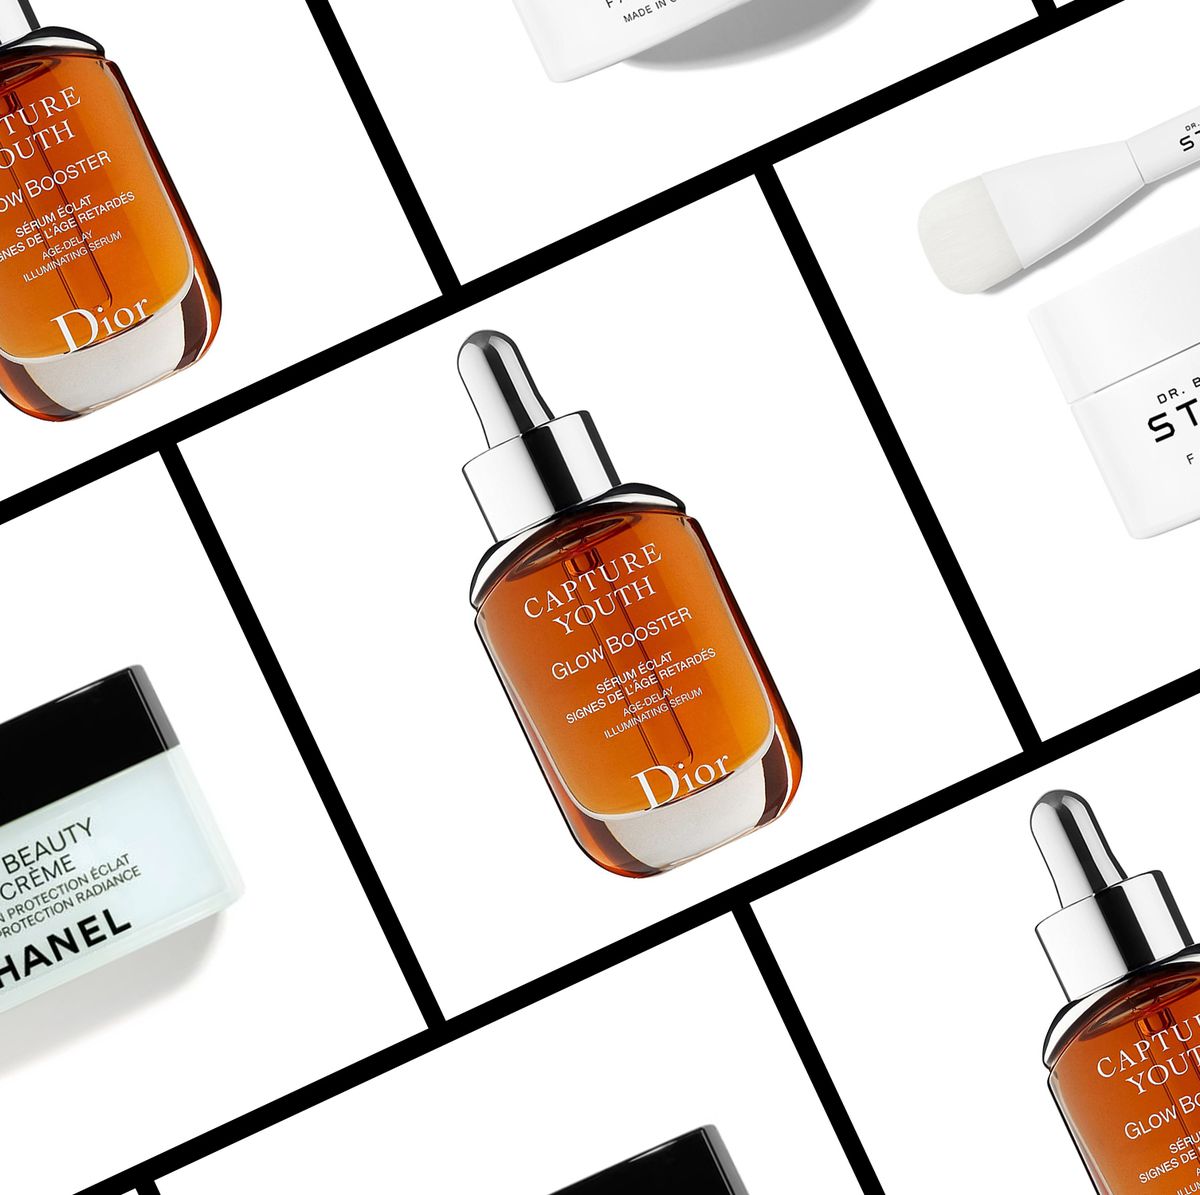 15 Luxury Skincare Items On Sale at Gilt 2021: Dior, Chanel, More